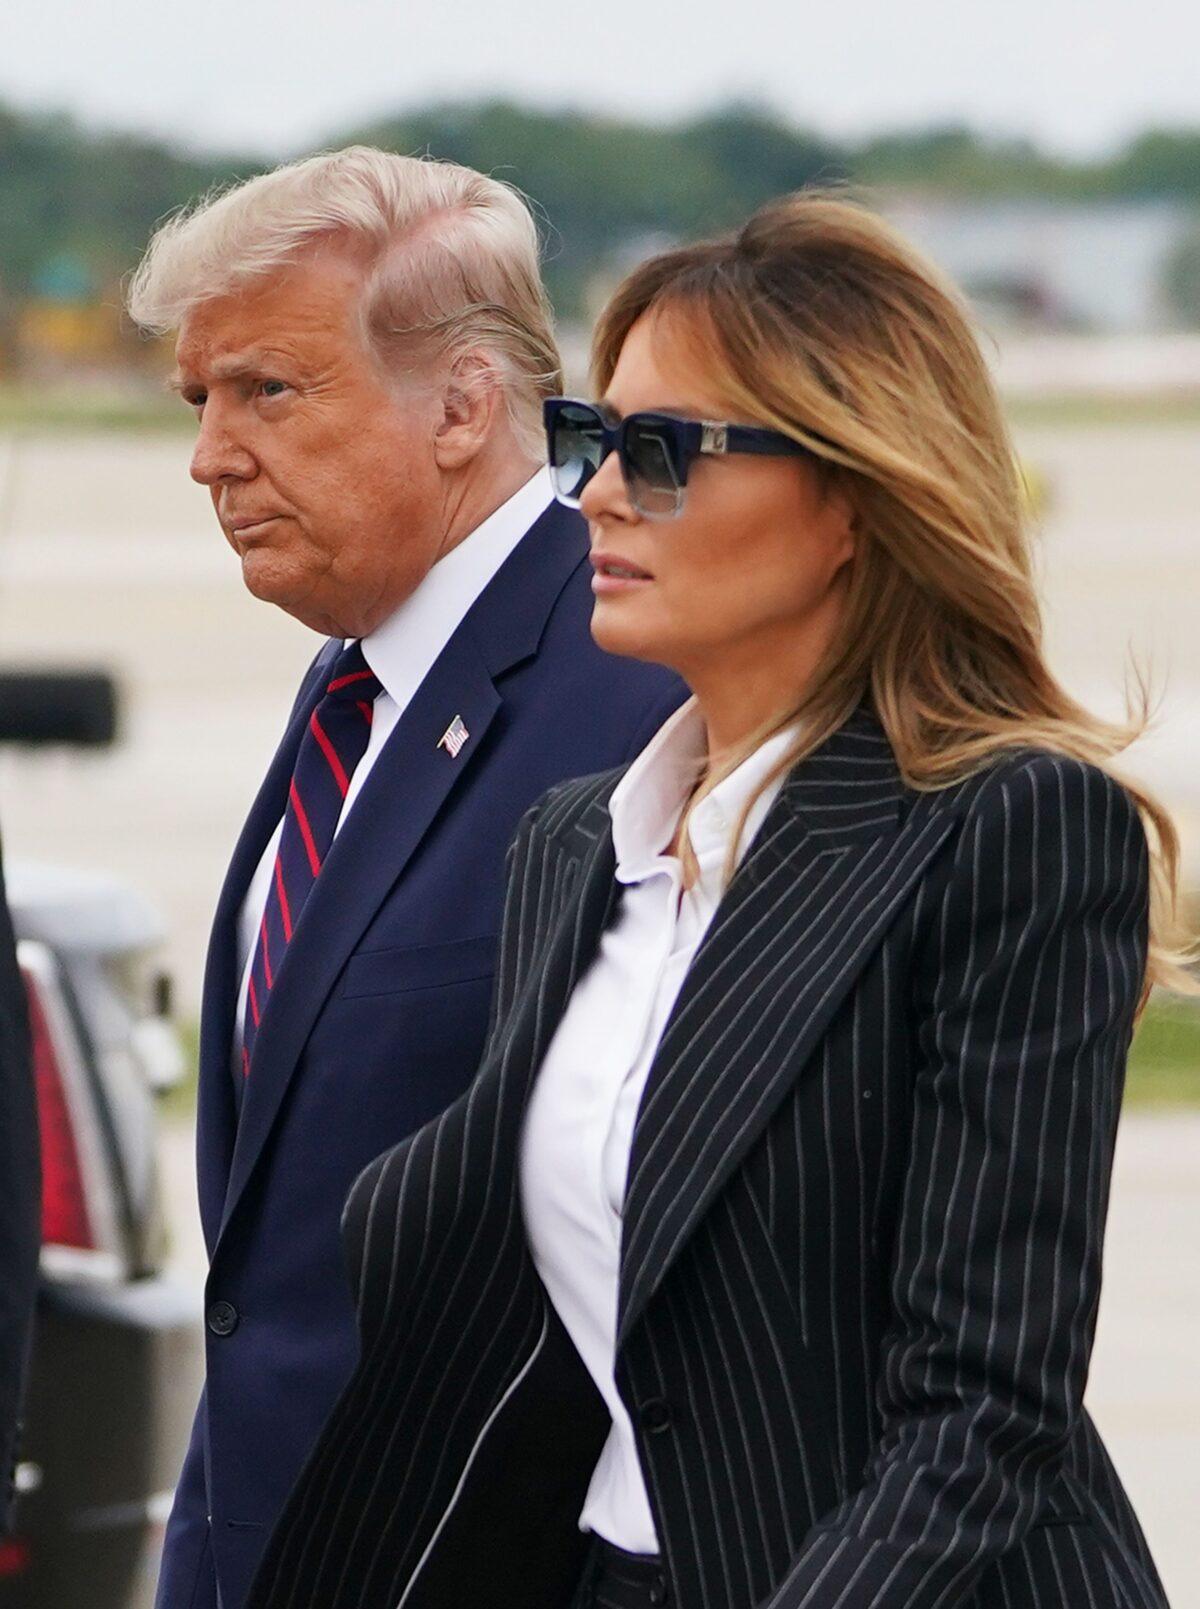 President Donald Trump and First Lady Melania Trump arrive at Cleveland Hopkins International Airport in Cleveland, Ohio on Sept. 29, 2020. (Mandel Ngan/AFP via Getty Images)